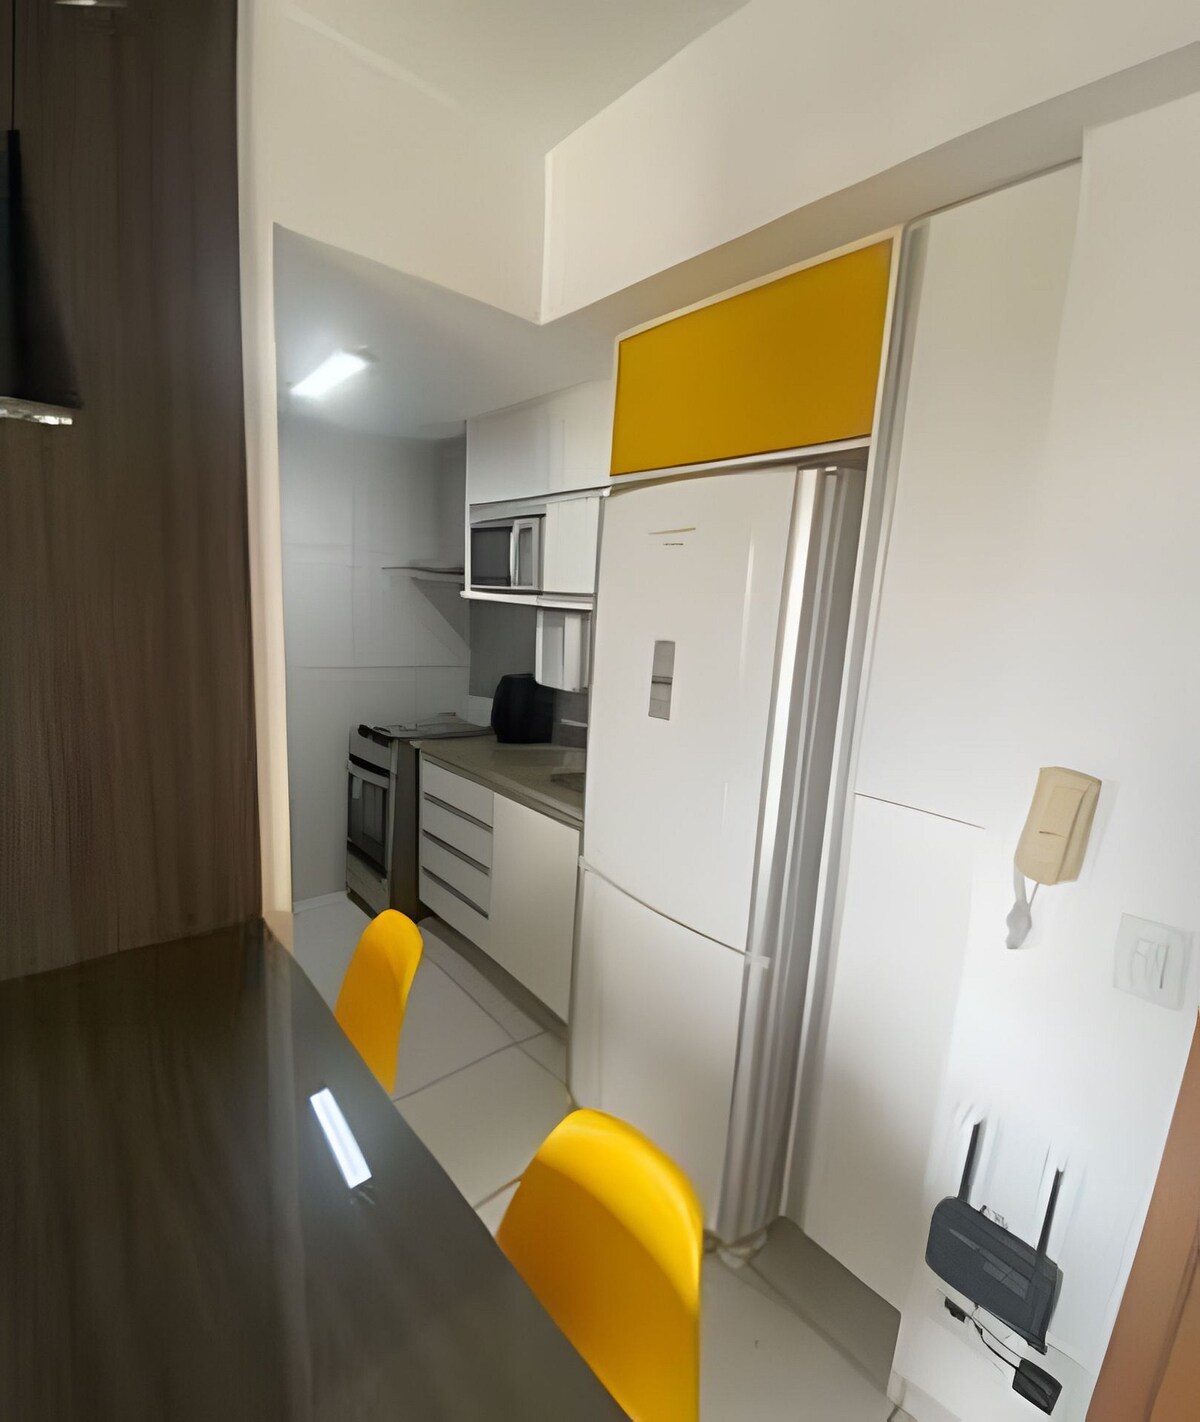 Apartment with/Garage, Elevator, Full Kitchen, Dry